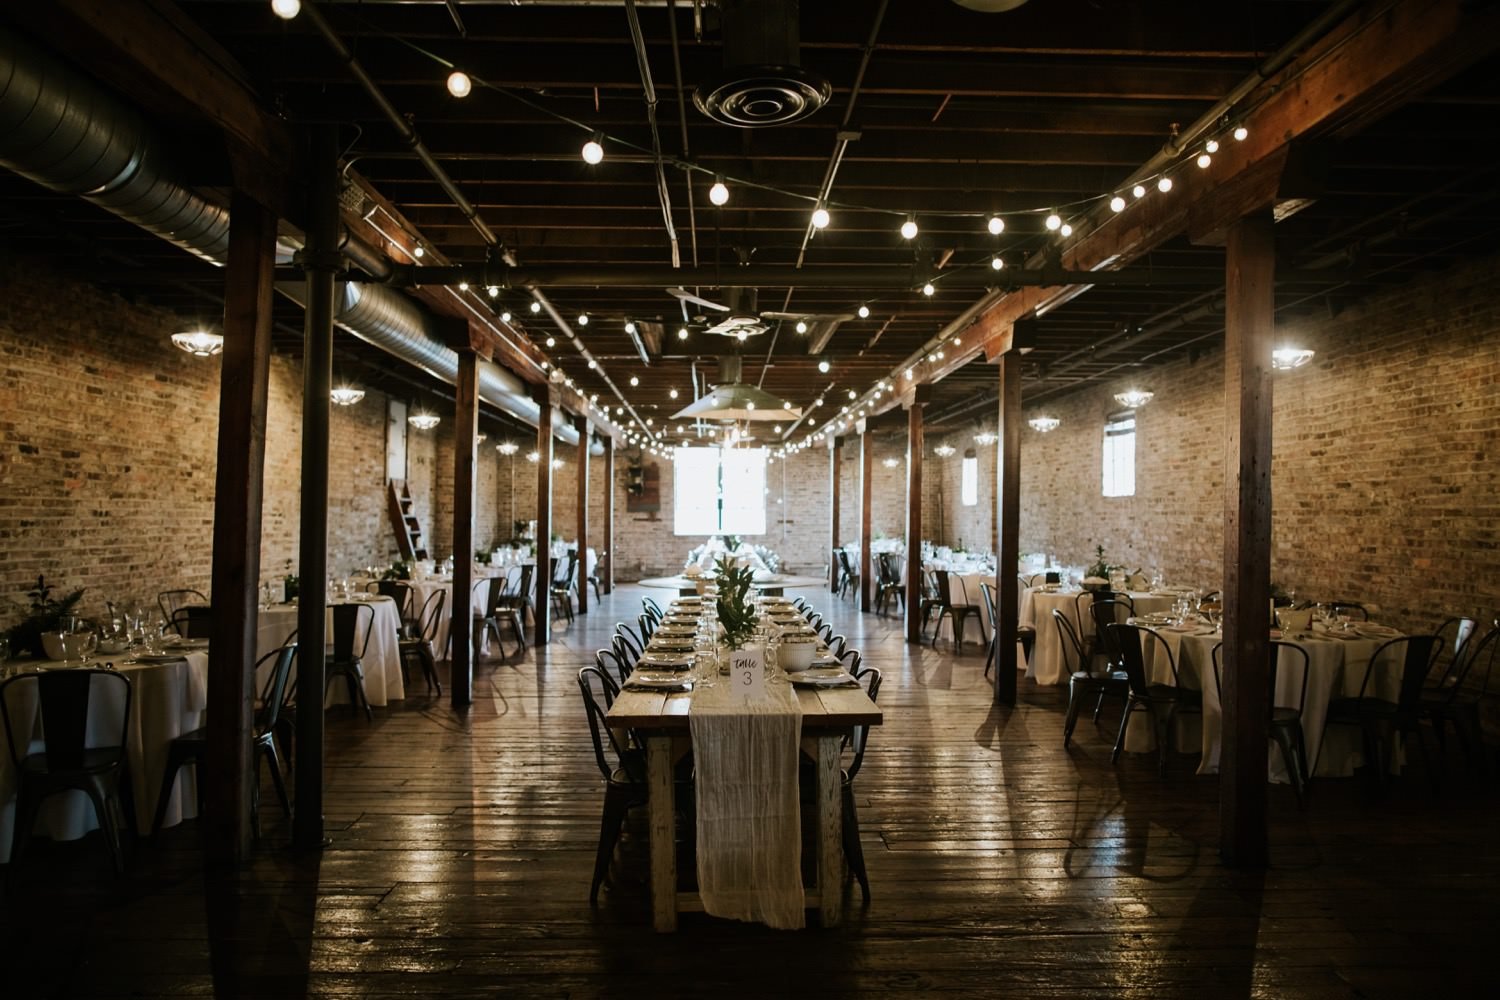 Indoor wedding reception space at the haight wedding venue near Chicago